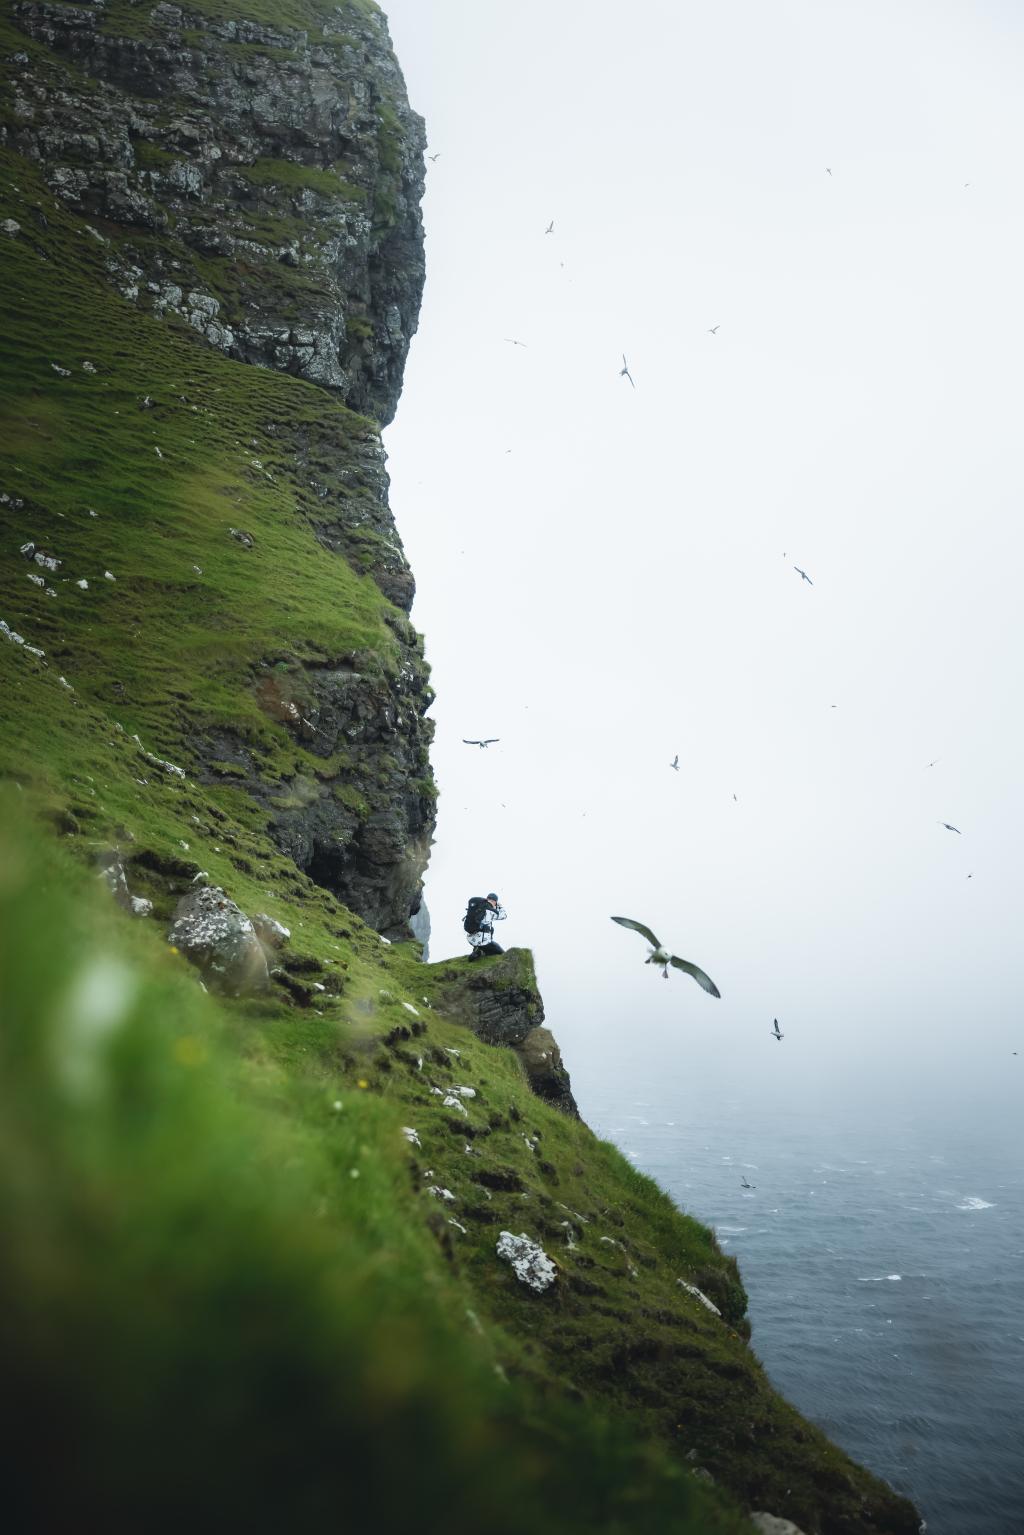 Bird watching, over the green cliffs of the Faroe Islands. Tourists capturing images. 